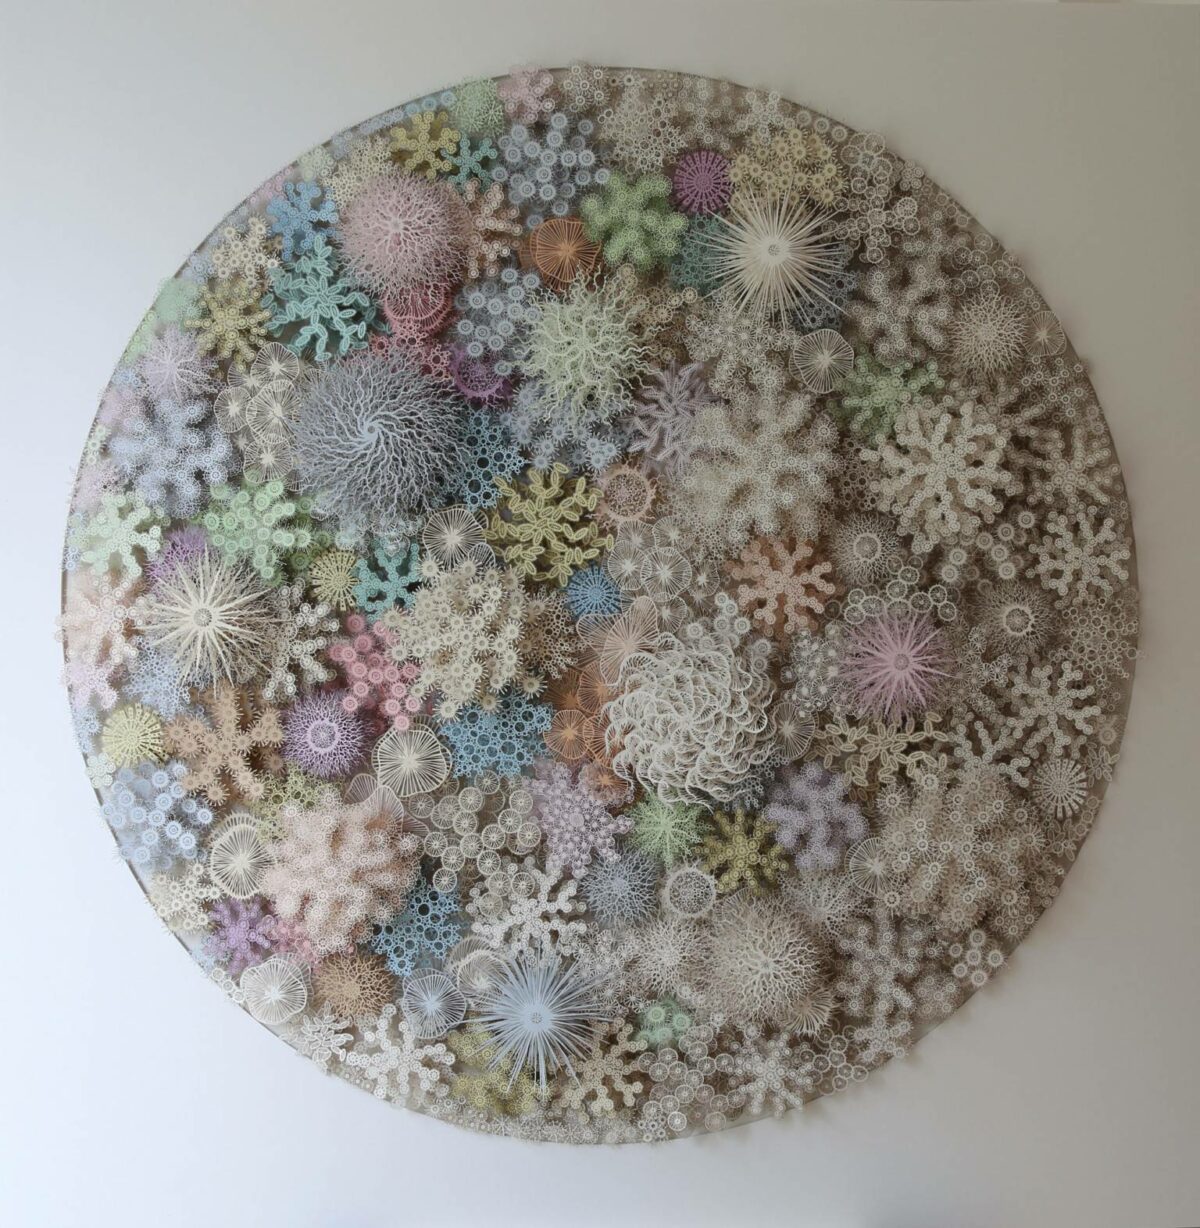 The Beautifully Intricate Paper Cut Sculptures Inspired By Corals And Microorganisms Of Rogan Brown 26